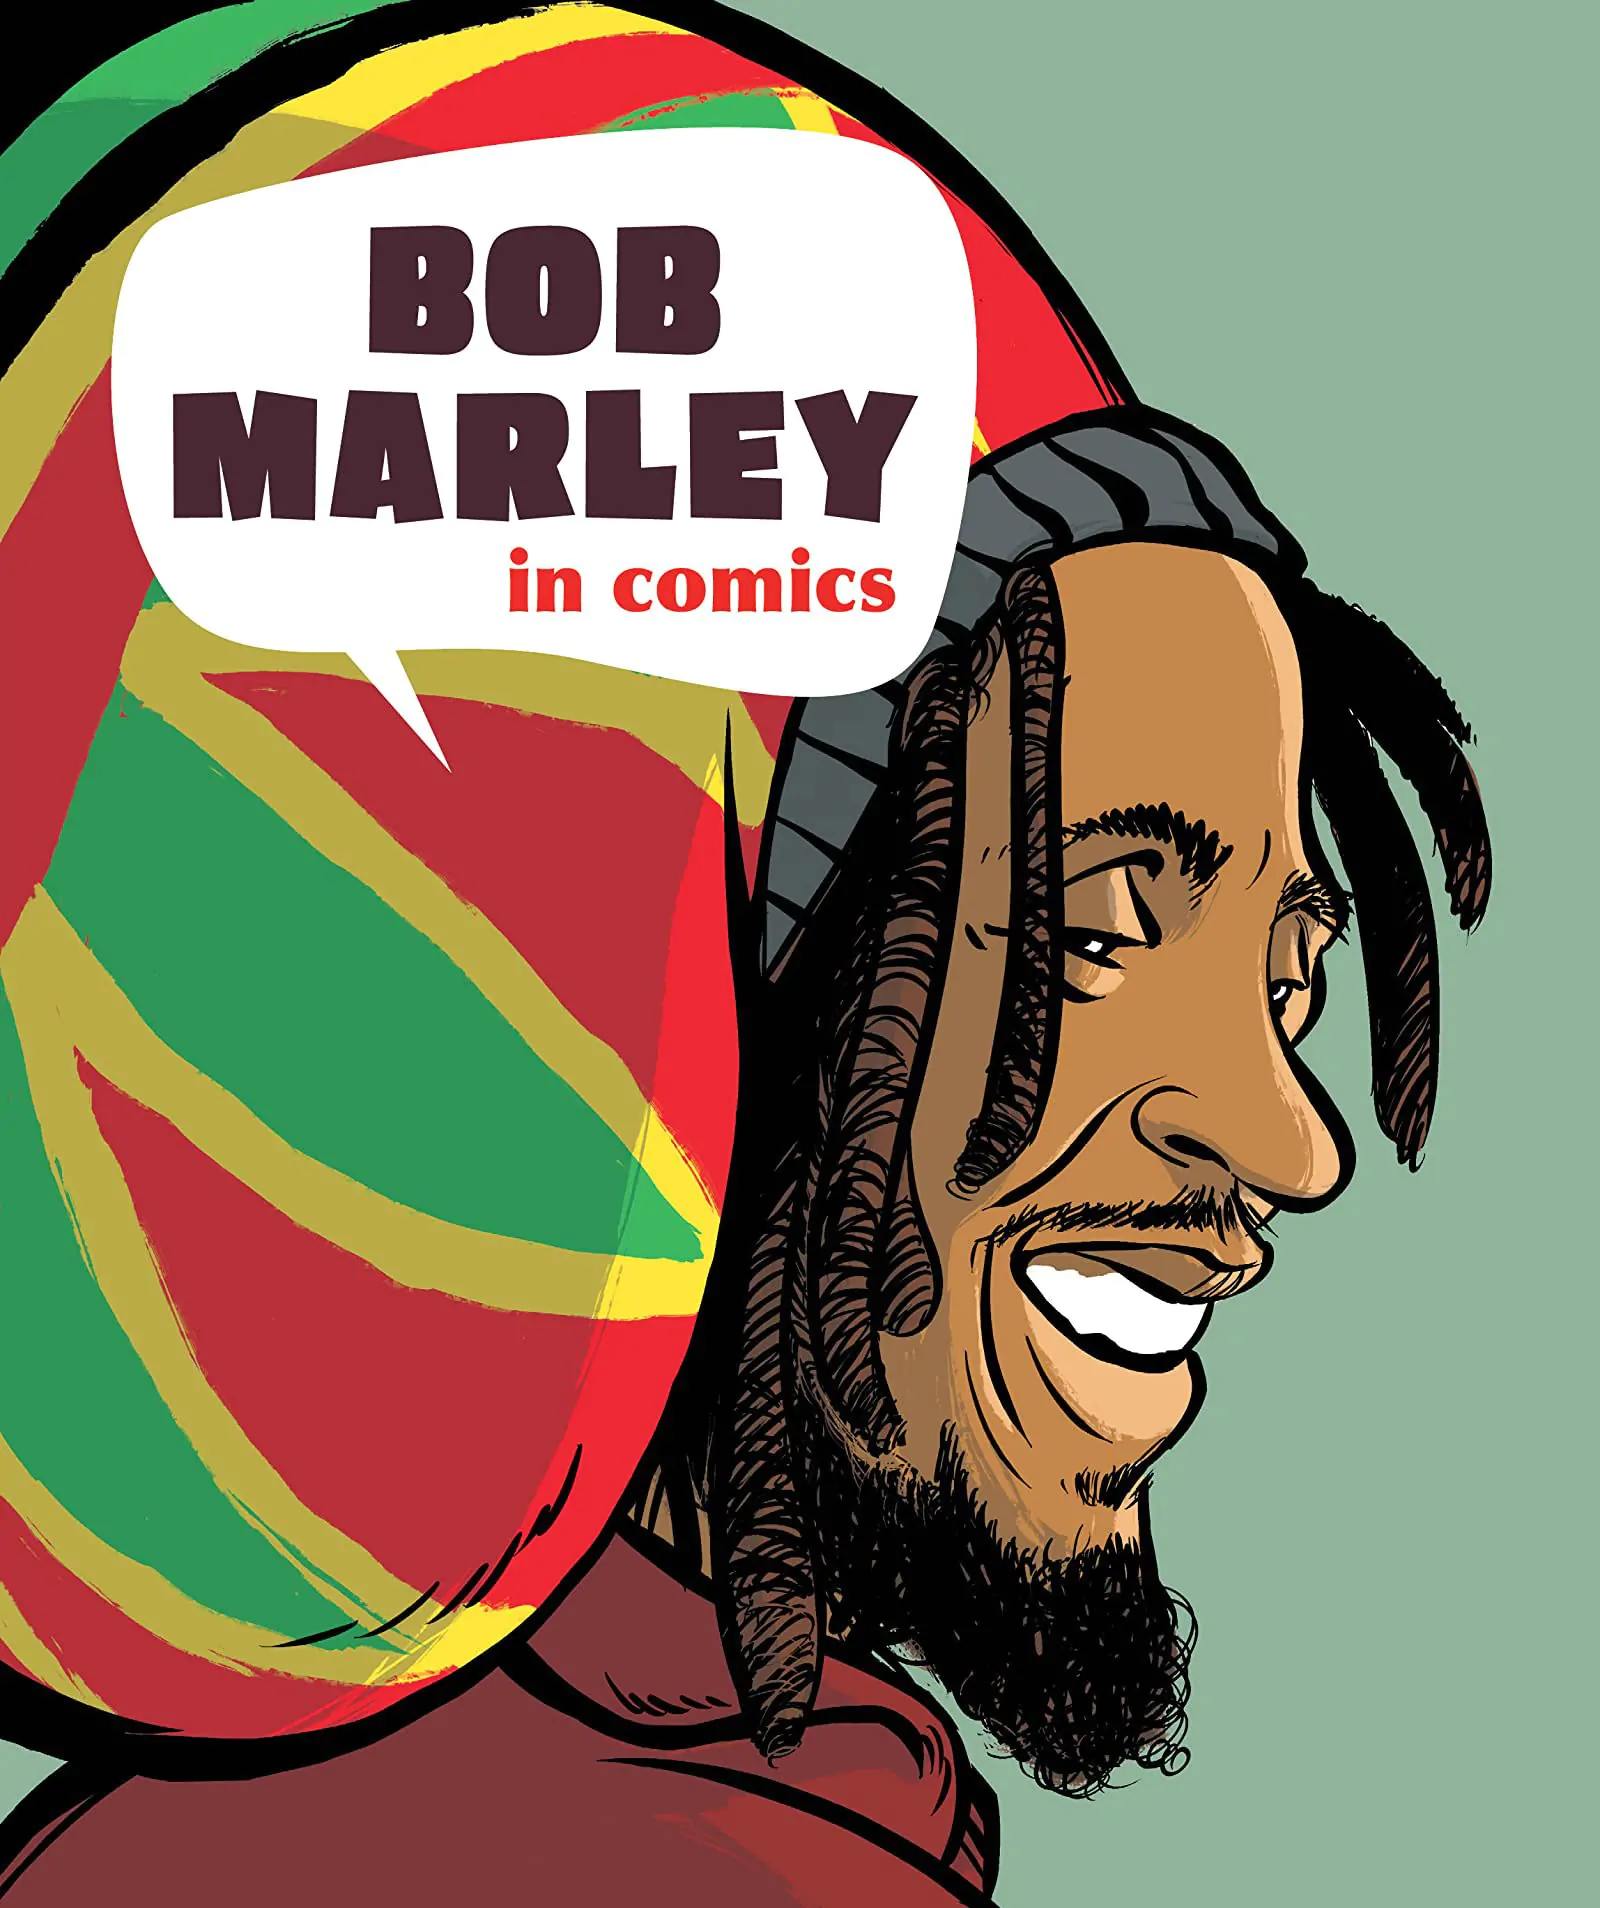 BOOK REVIEW: Bob Marley in Comics by Sophie Blitman and Gaet’s